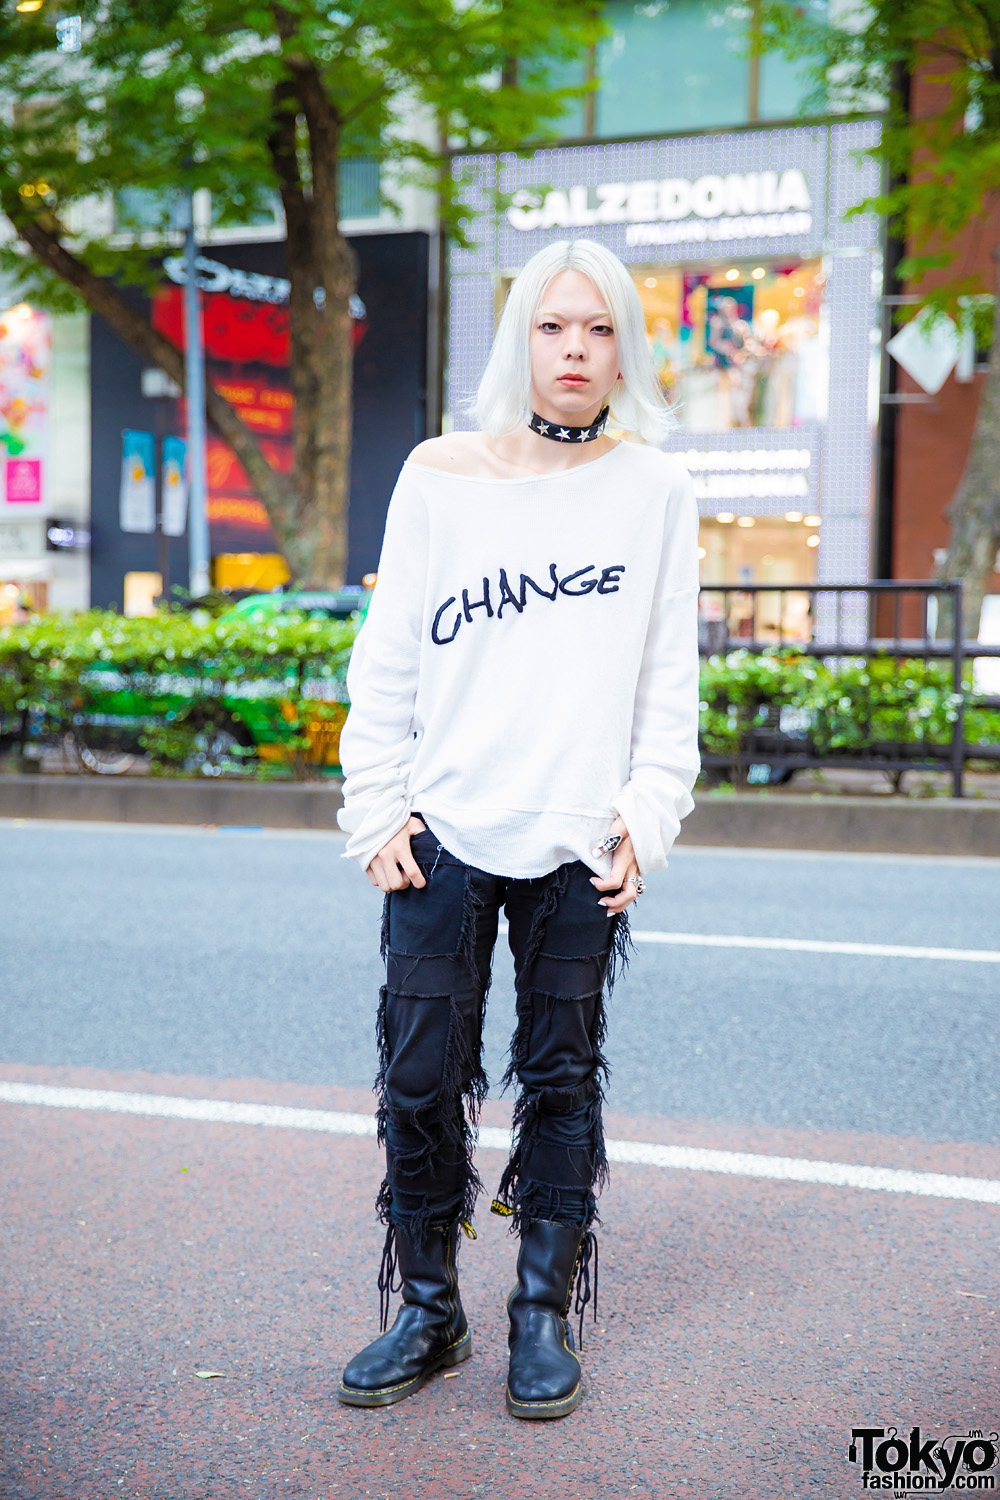 Monochromatic Edgy Streetwear Style w/ GVGV, Christian Dada, Dr. Martens, Givenchy & Tokyo Human Experiments